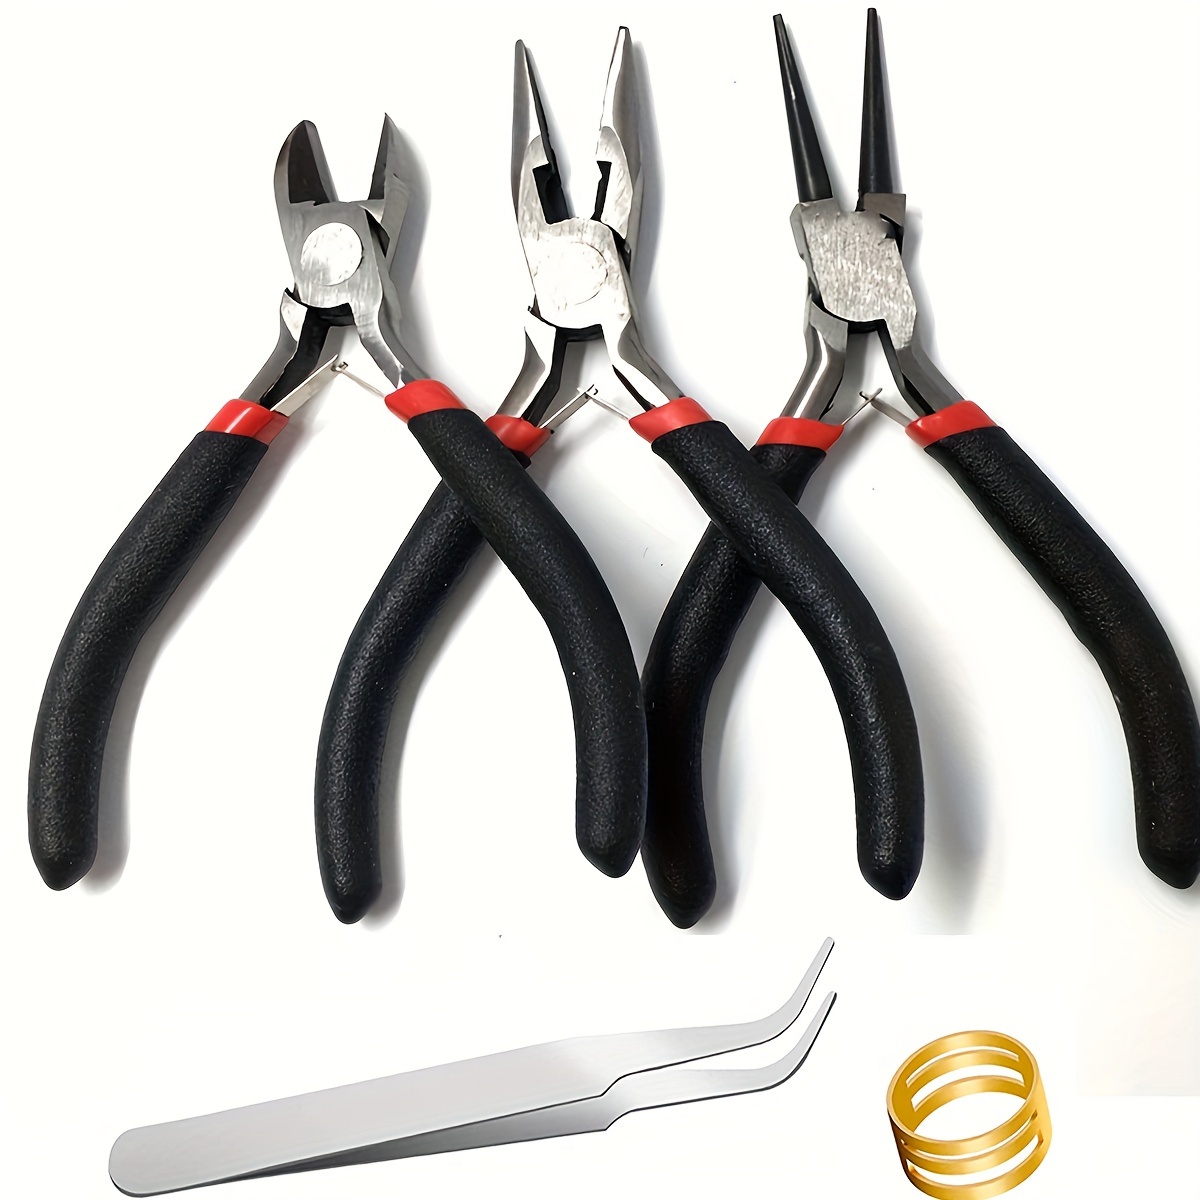 6pcs/set Jewelry Making Tools Set, 4pcs Jewelry Pliers, 1pc Rings Opening  Tool, 1pc Black Tweezers, Including Needle-shaped Circular Wire Cutter And C